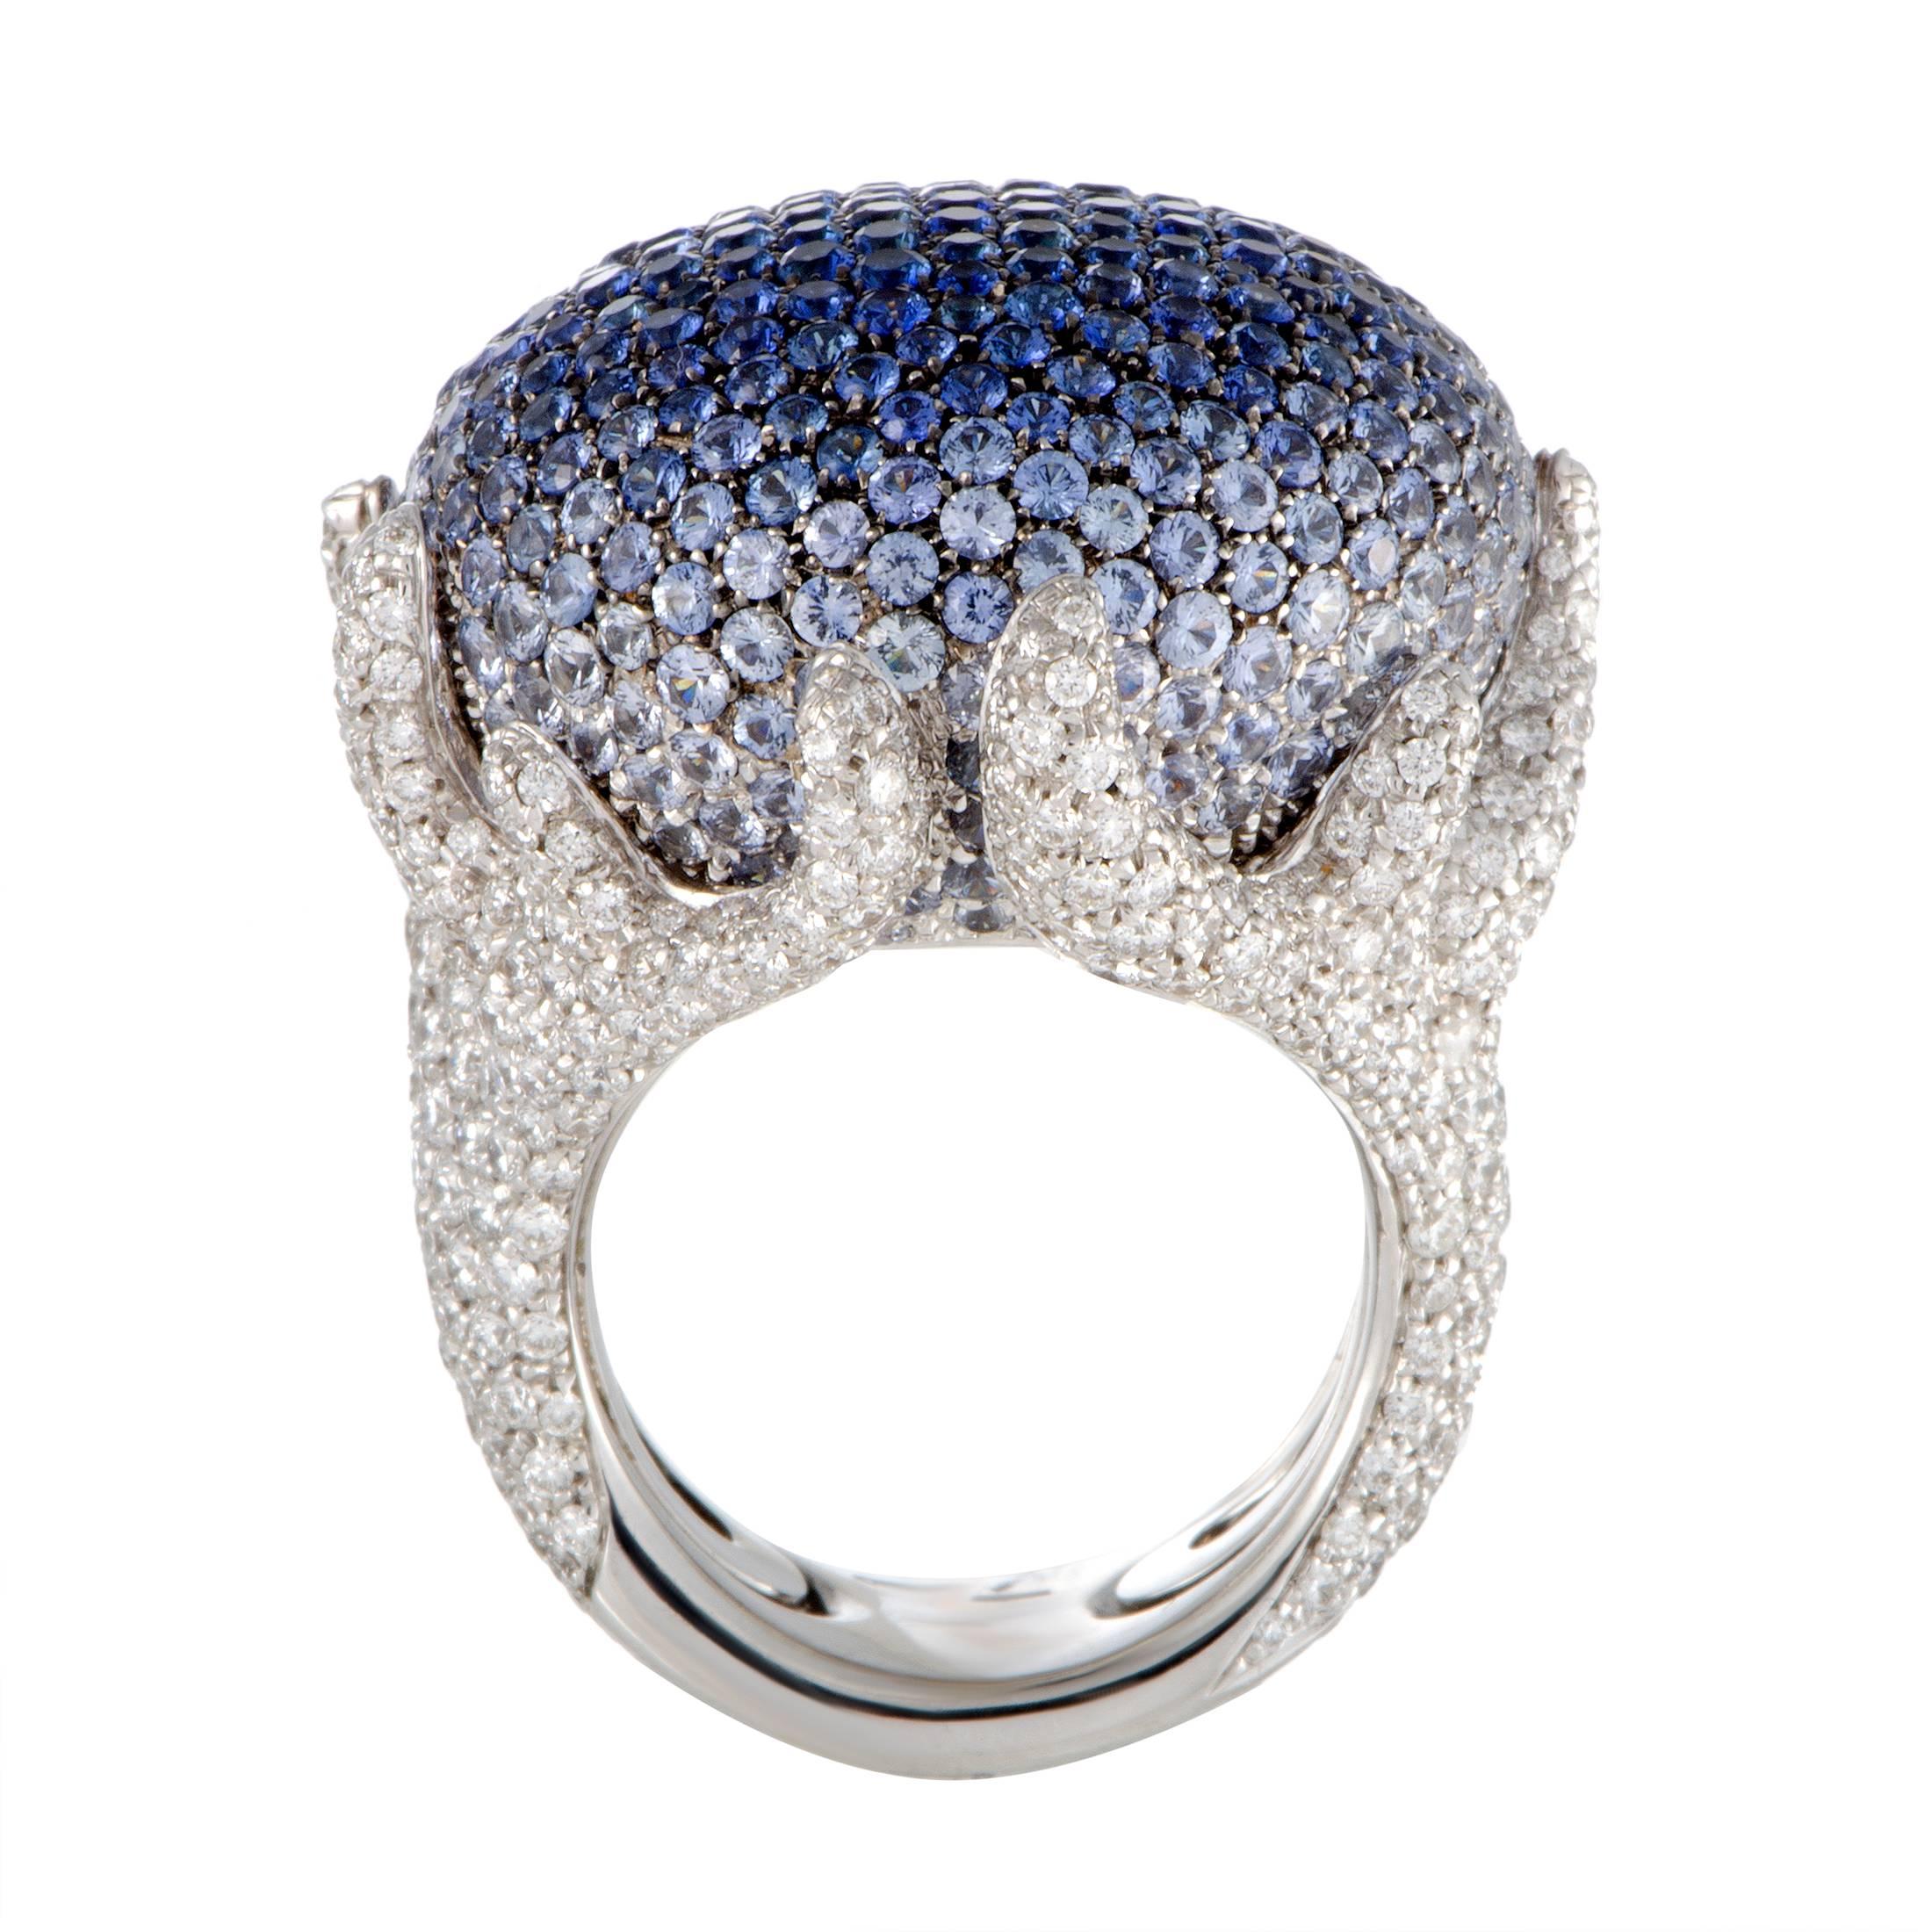 Lavishly paved with diamonds and sapphires, this stunning ring designed by Palmiero exudes elegance and extravagance. The ring is made of prestigious 18K white gold and weighs 39.6 grams, while the sapphires total 8.73 carats and the nearly